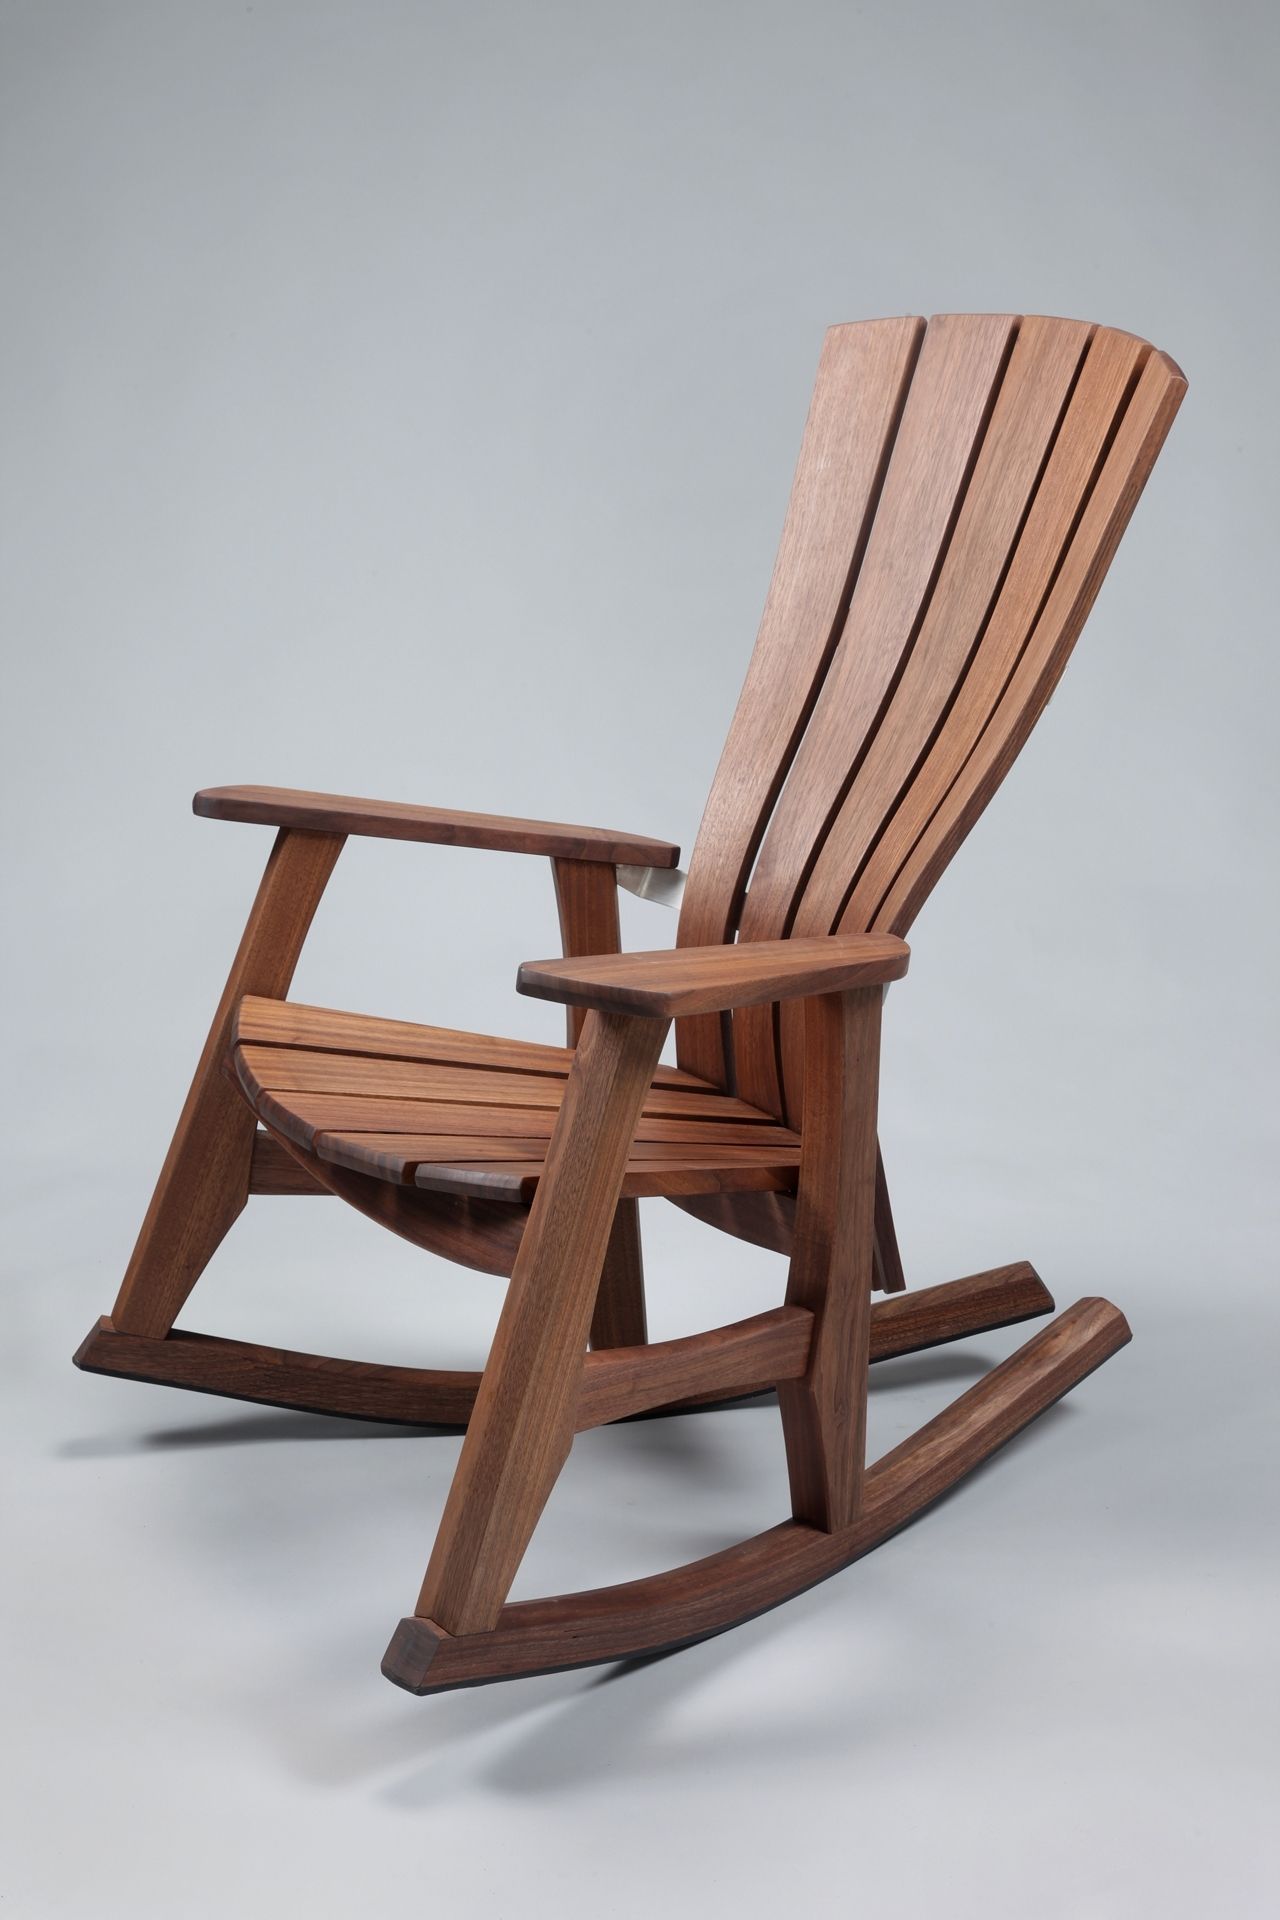 Top 15 Of Unique Outdoor Rocking Chairs